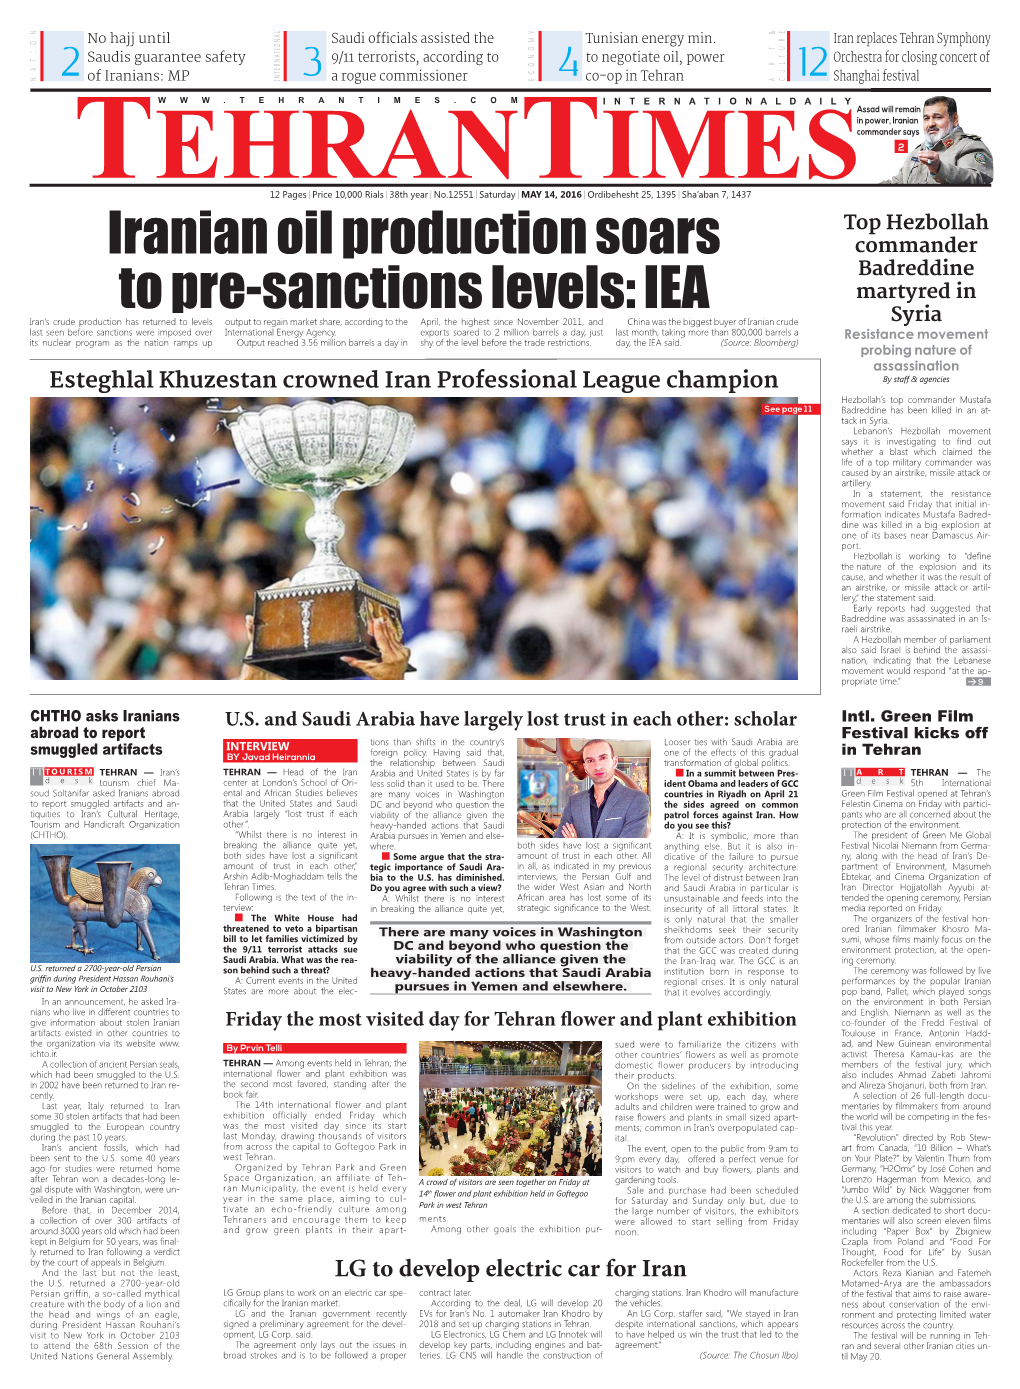 Iranian Oil Production Soars to Pre-Sanctions Levels